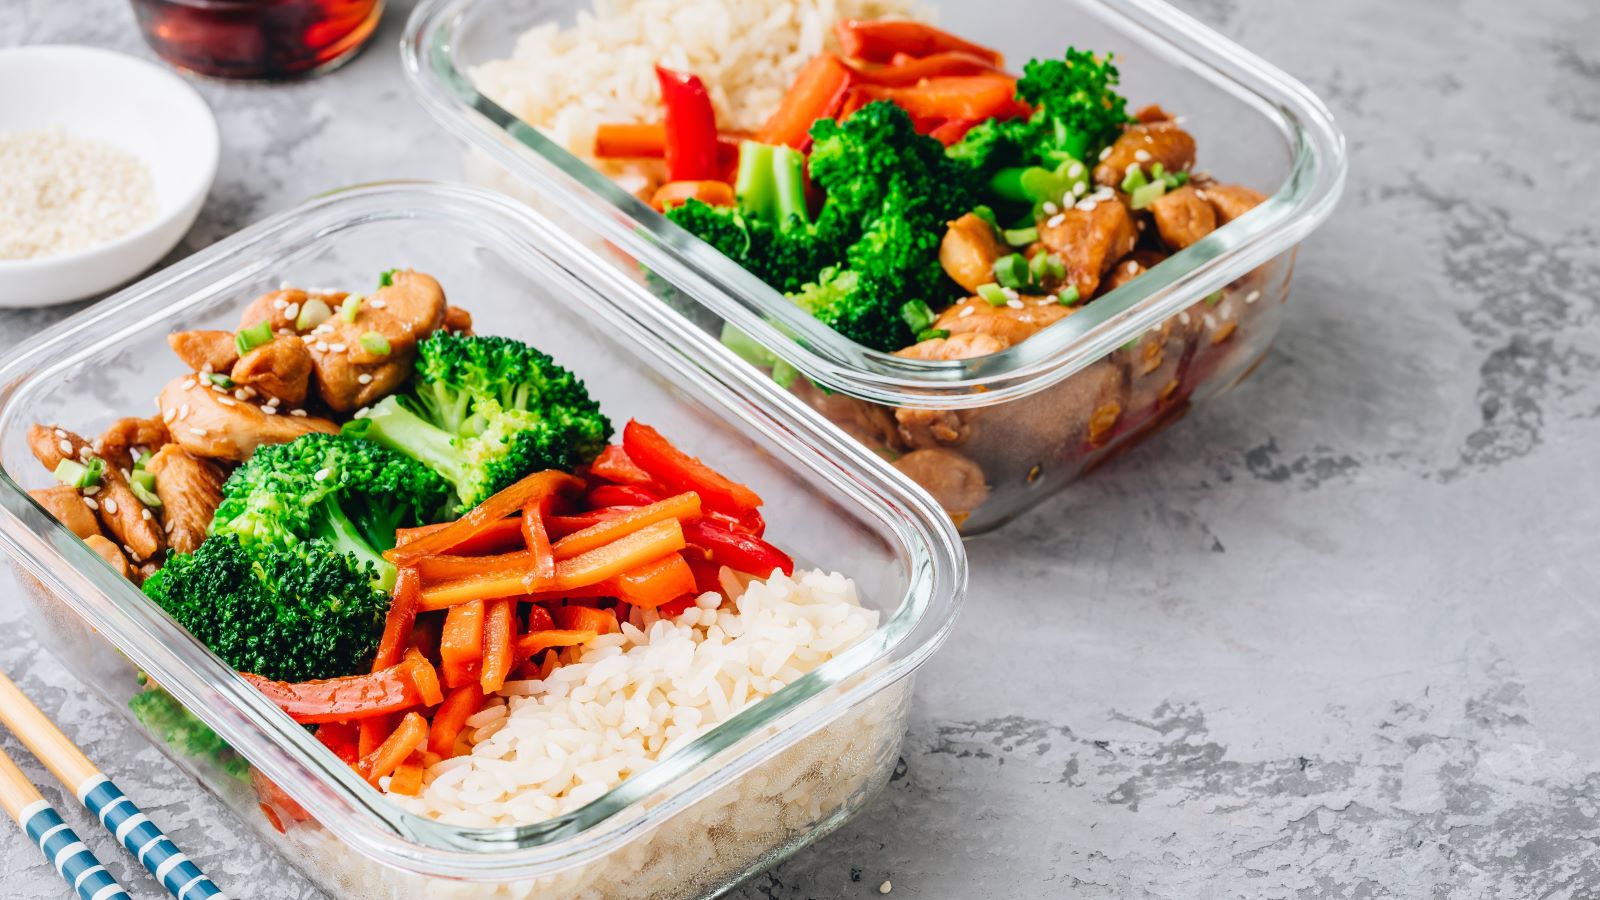 8 Tips for a Successful Meal Prep, According to a Dietitian